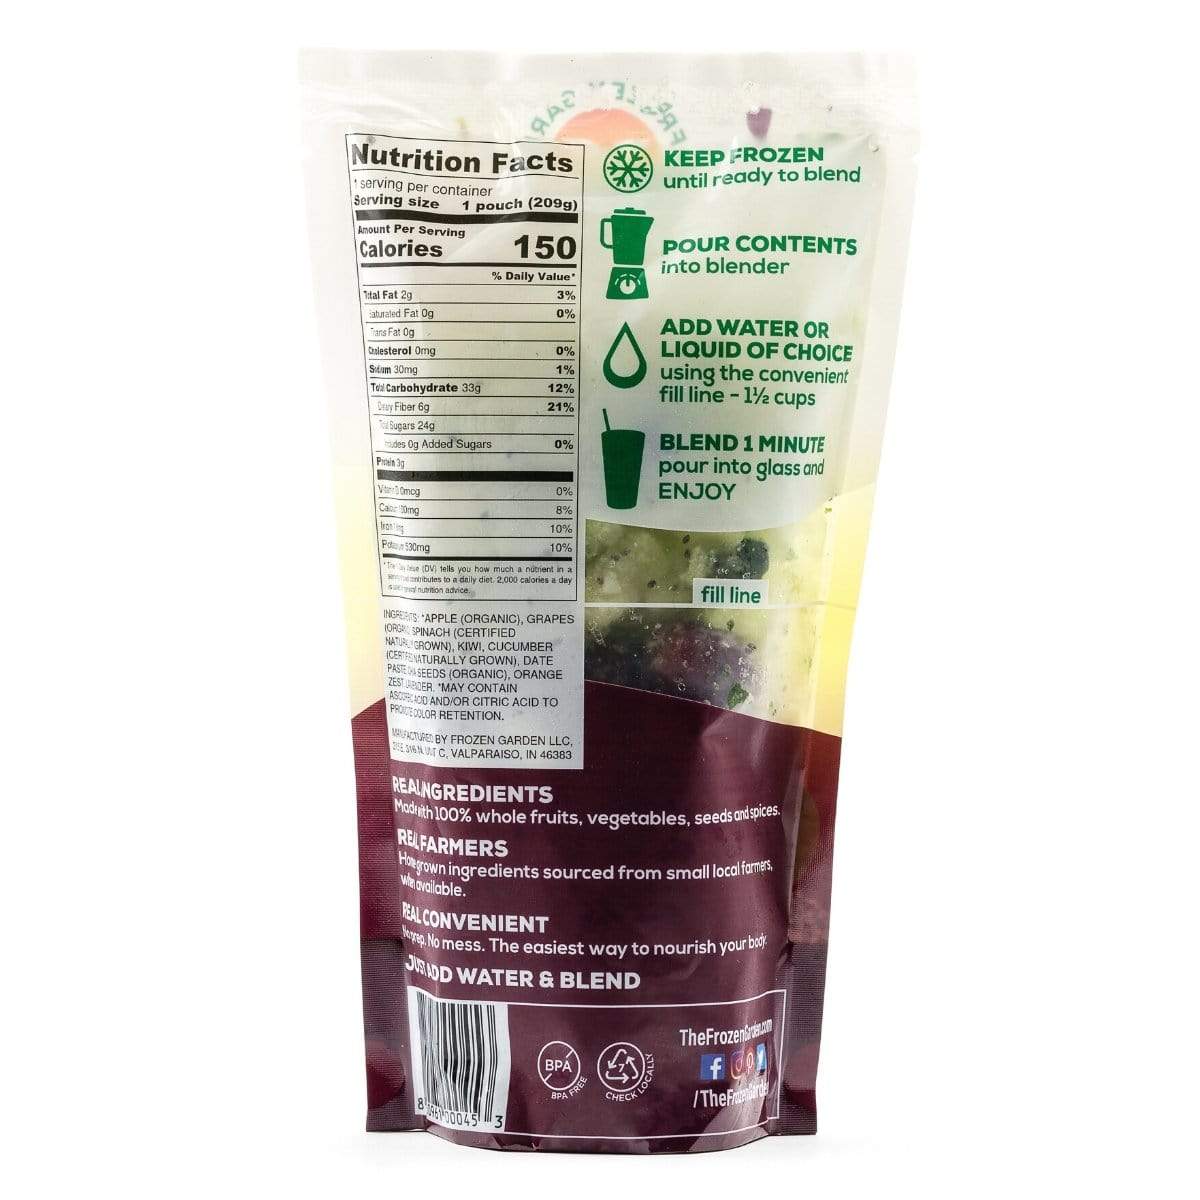 Napa-licious Green Smoothie back of pouch